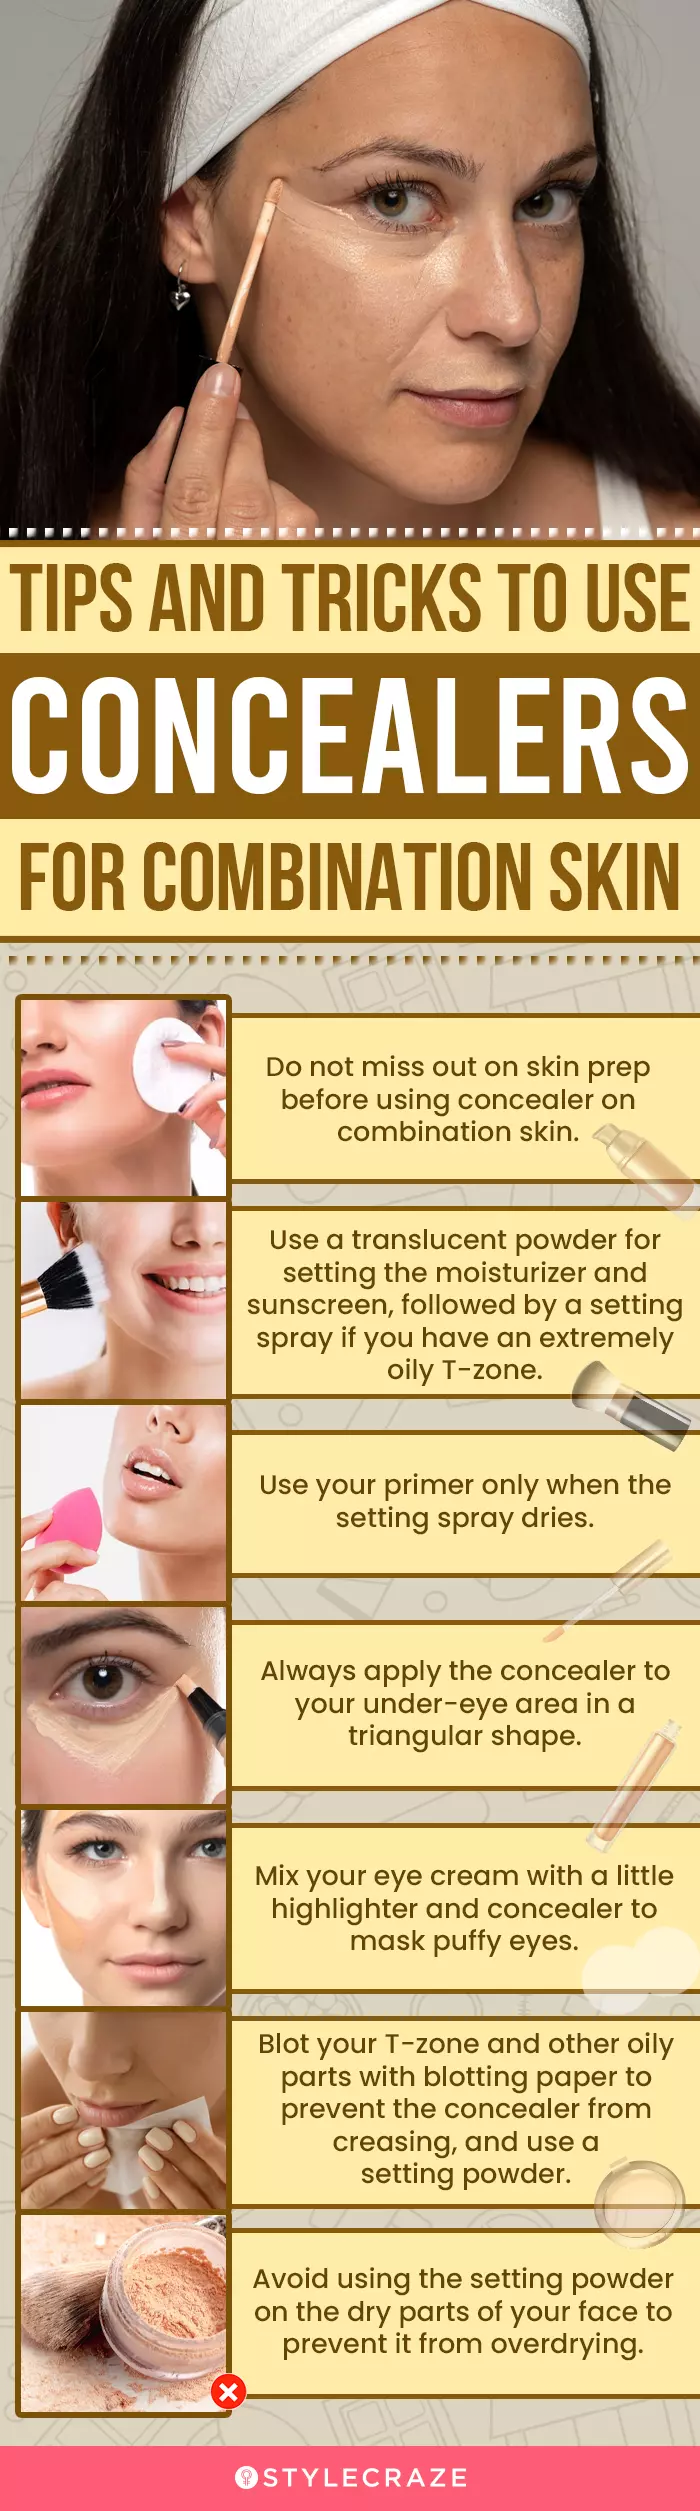 Tips And Tricks To Use Concealers For Combination Skin (infographic)